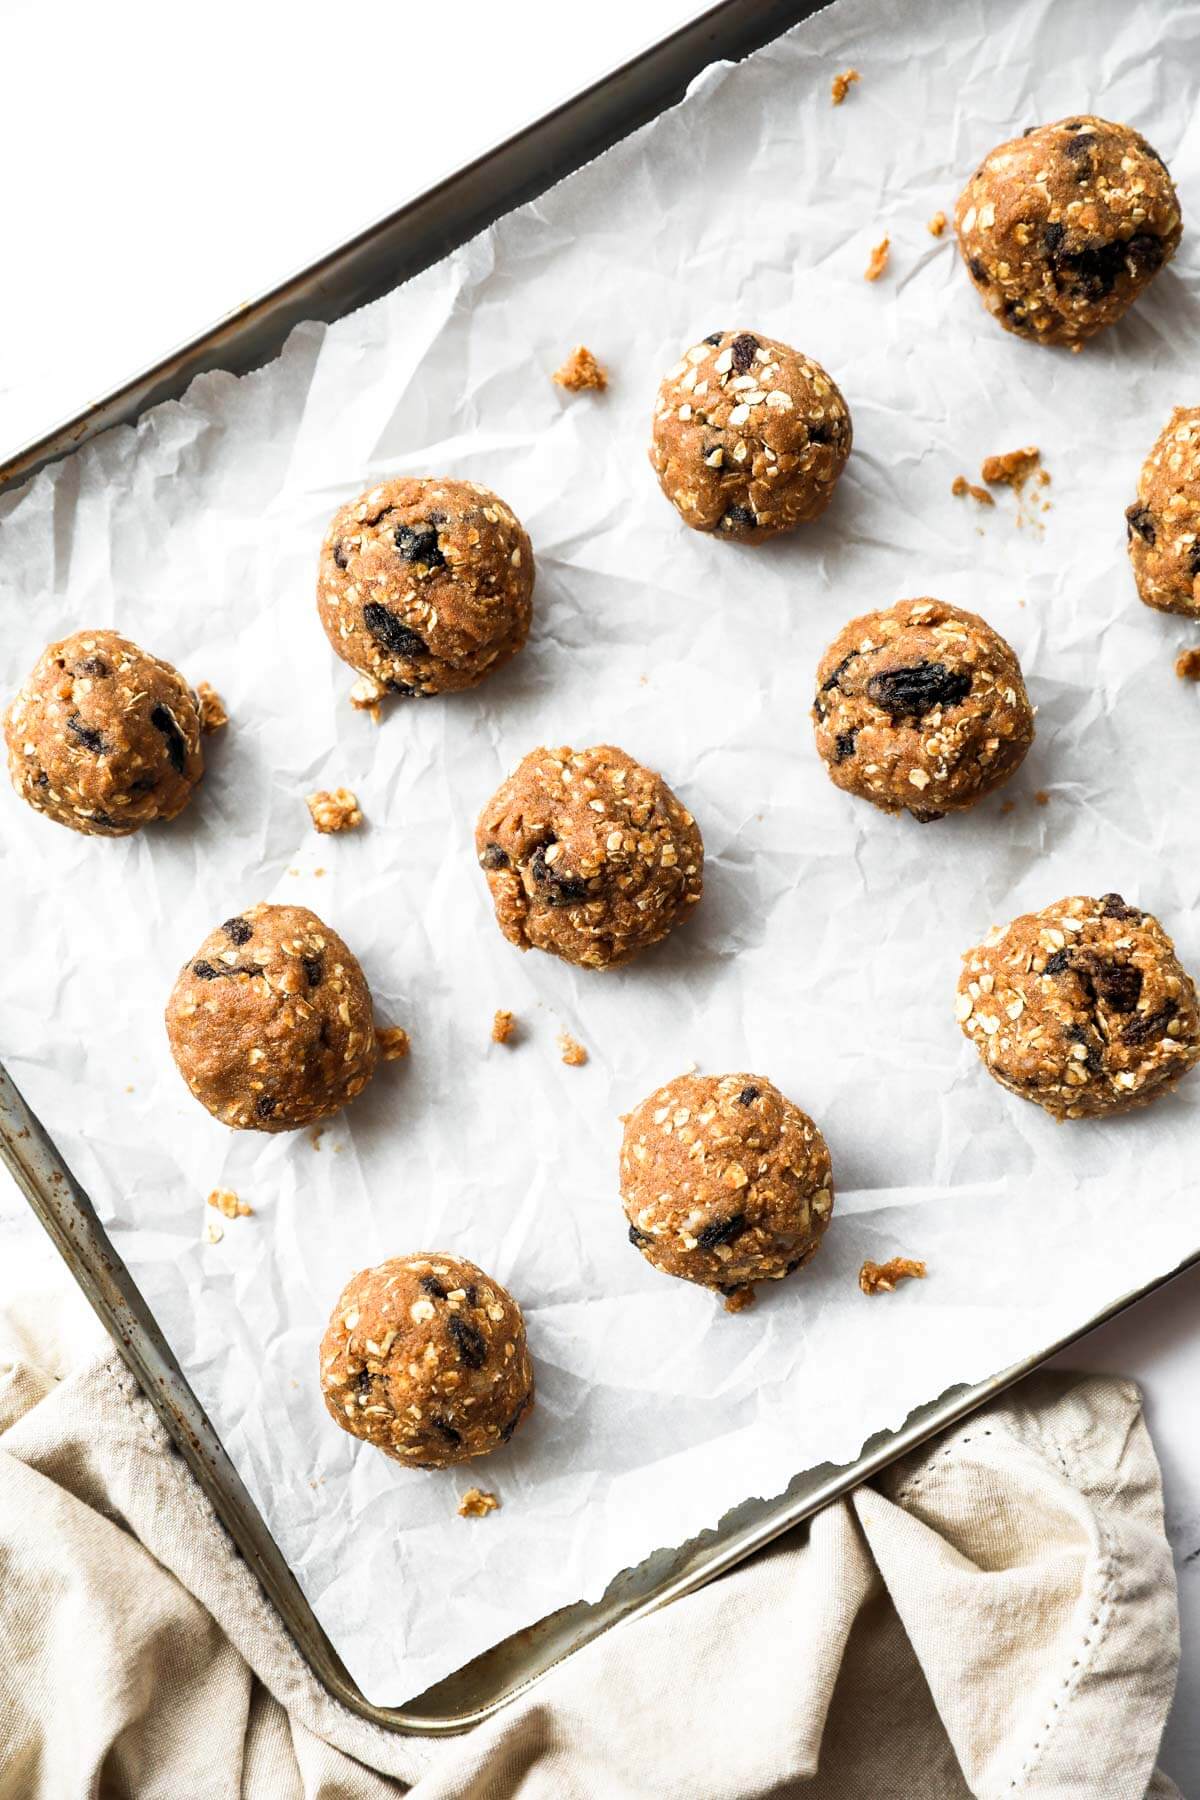 Vegan, healthy oatmeal cookies are rolled into balls and placed on a cookie sheet before baking.